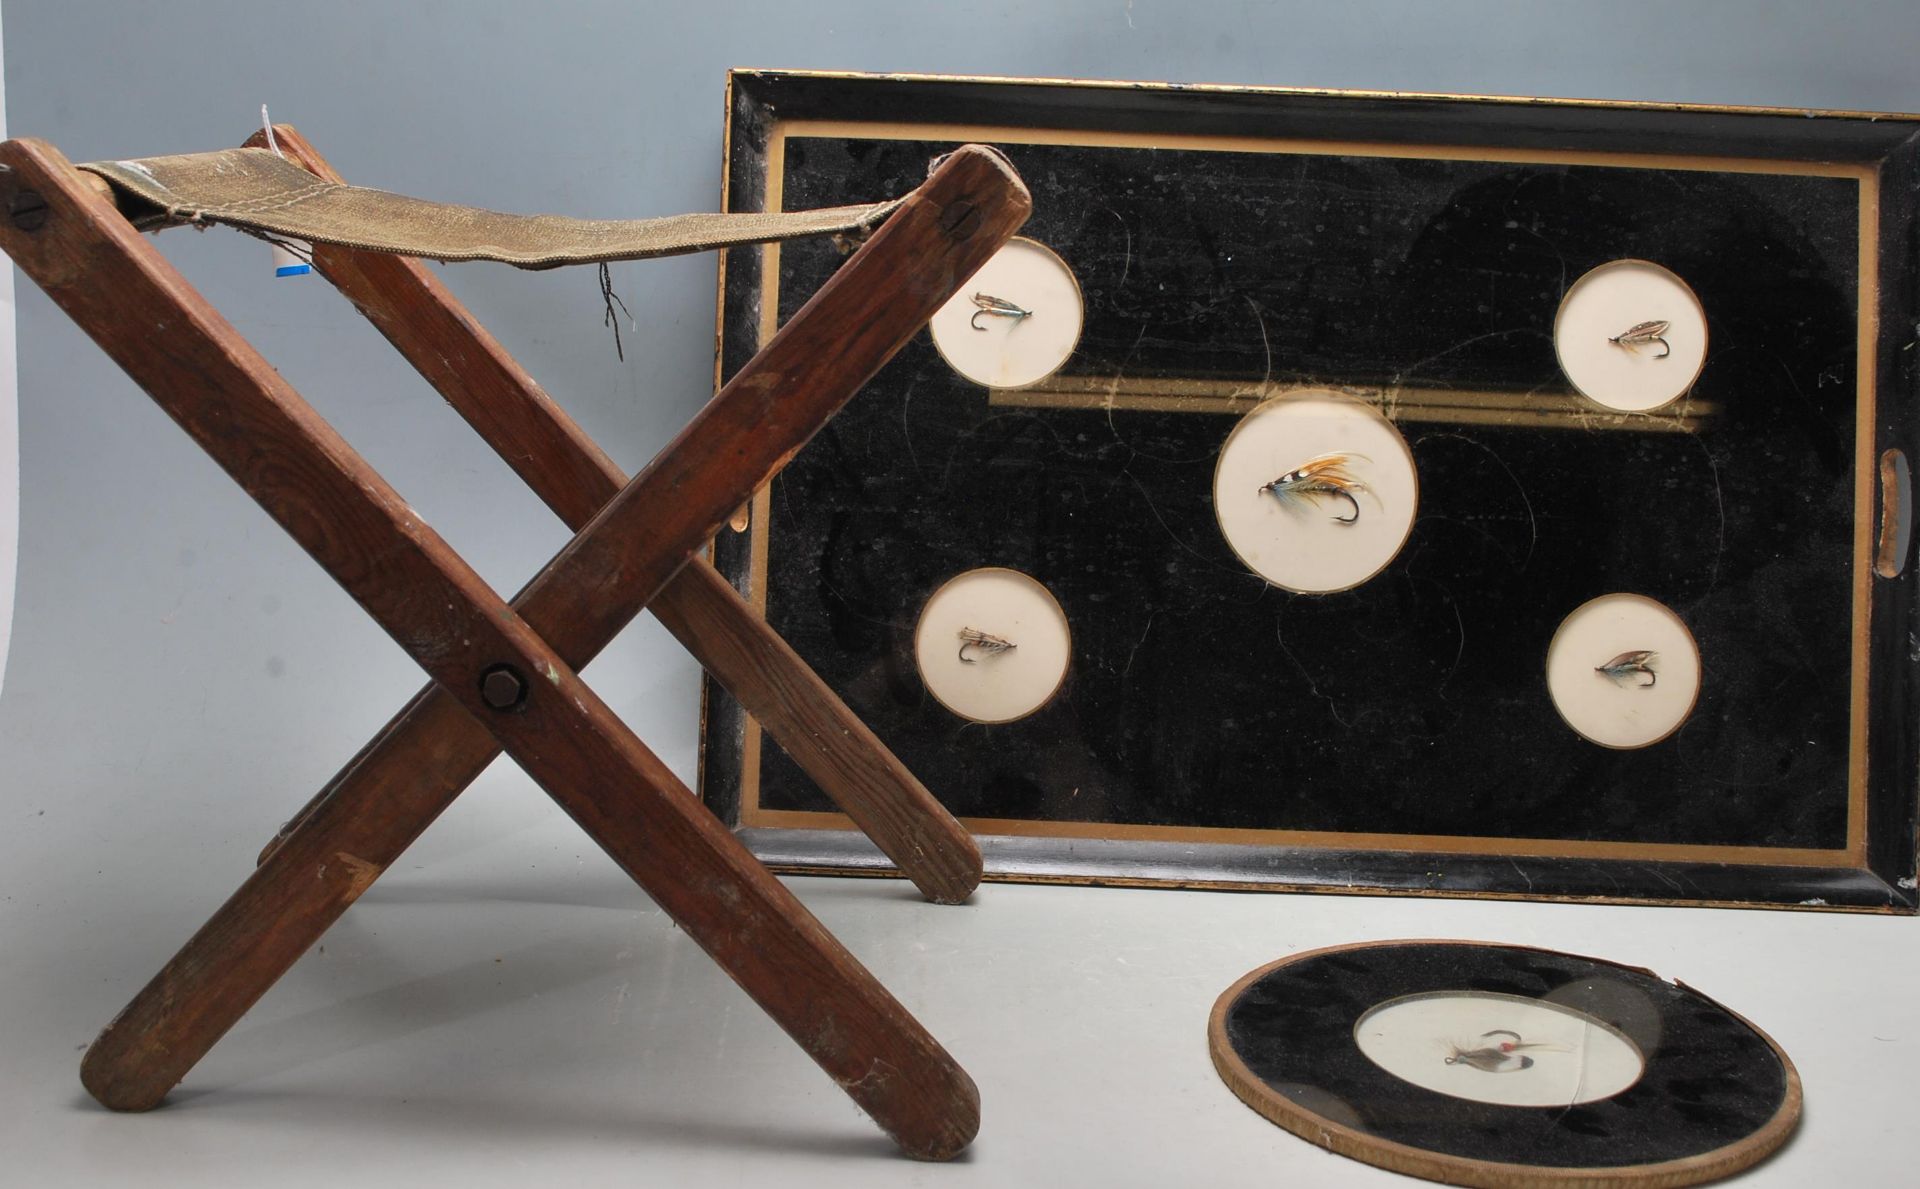 A COLLECTION OF FISHING RELATED ITEMS TO INCLUDE A SERVING TRAY - COASTER - FOLDING FISHING CHAIR